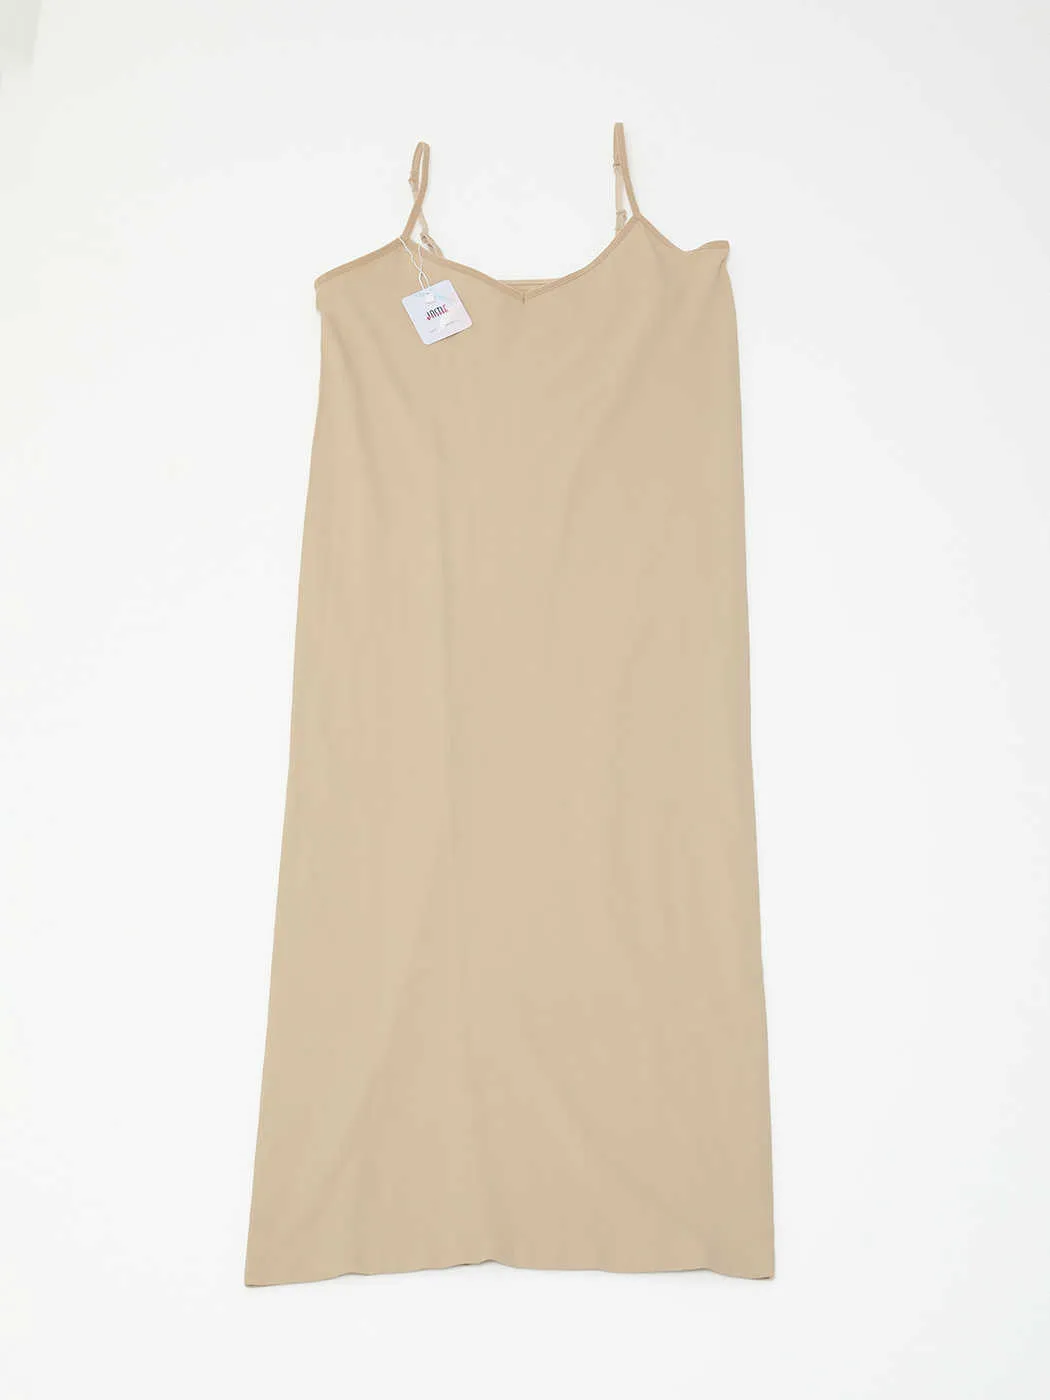 Seamless Nude Slip Casual Strapless Dress For Women Adjustable